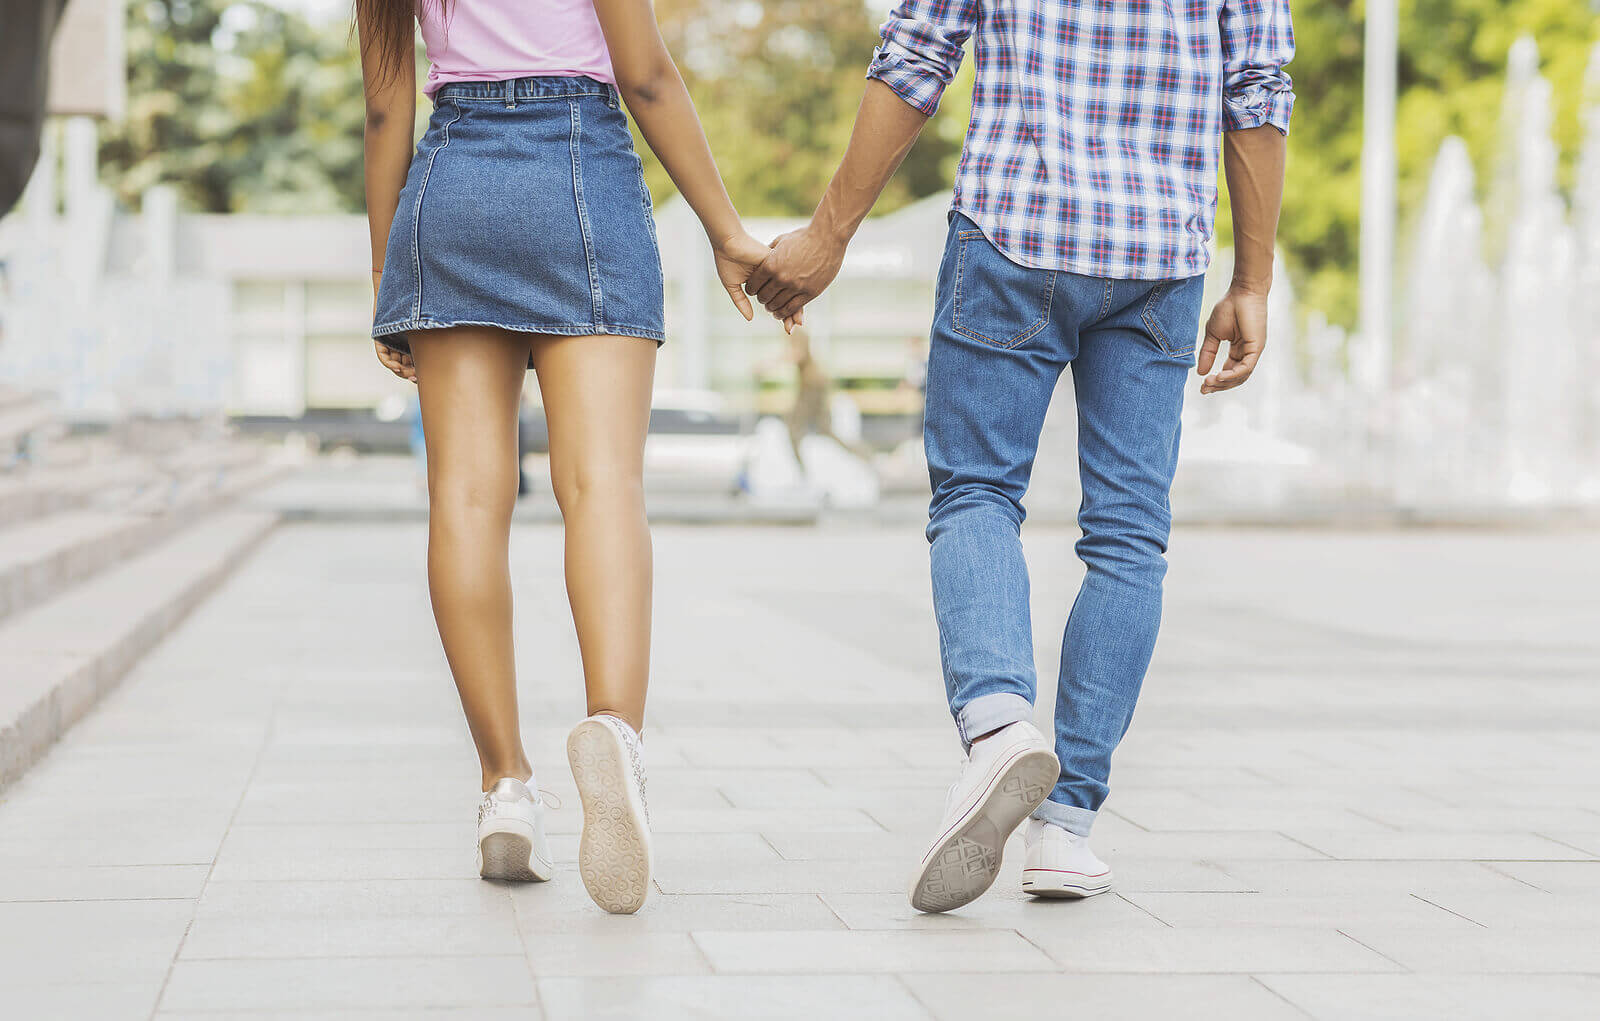 Teen couple walking holding hands. A teen counselor gives teen dative violence warning signs. We can give parenting help if you are worried about your teen. We can also help with counseling for teens in Scotch Plains, NJ.